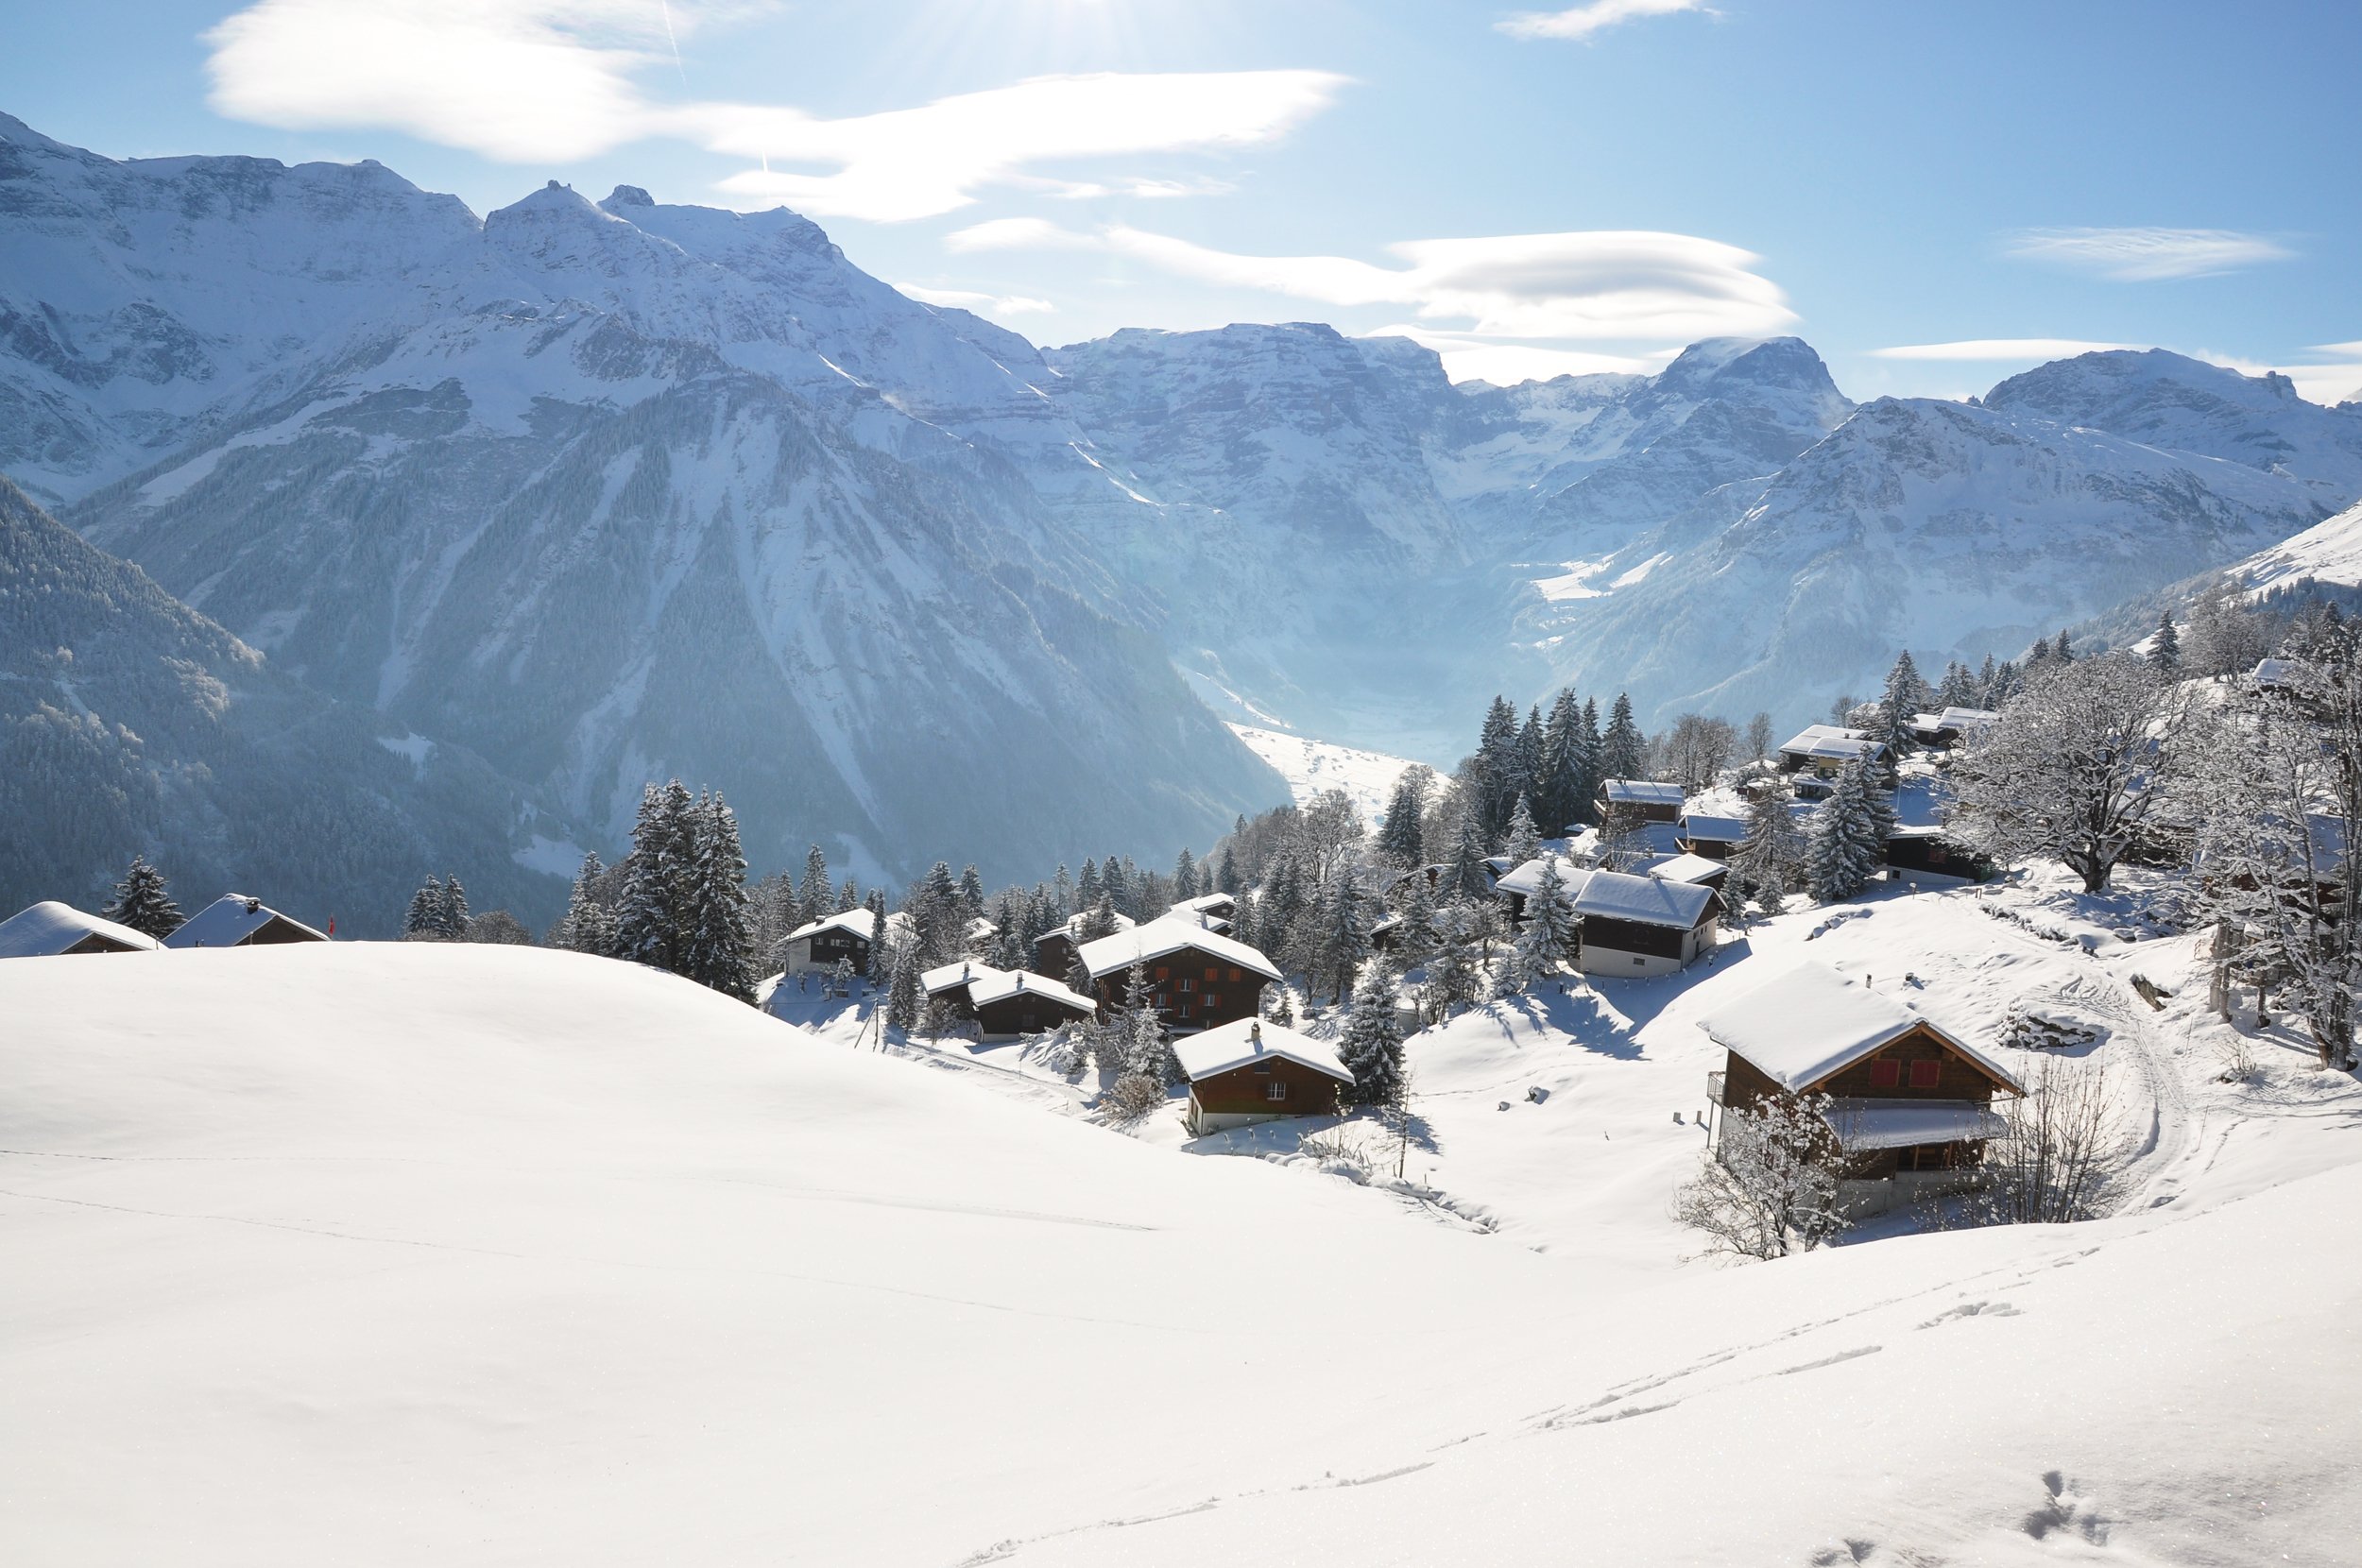 Properties in the Alps: Switzerland is getting more expensive, but France behaves differently